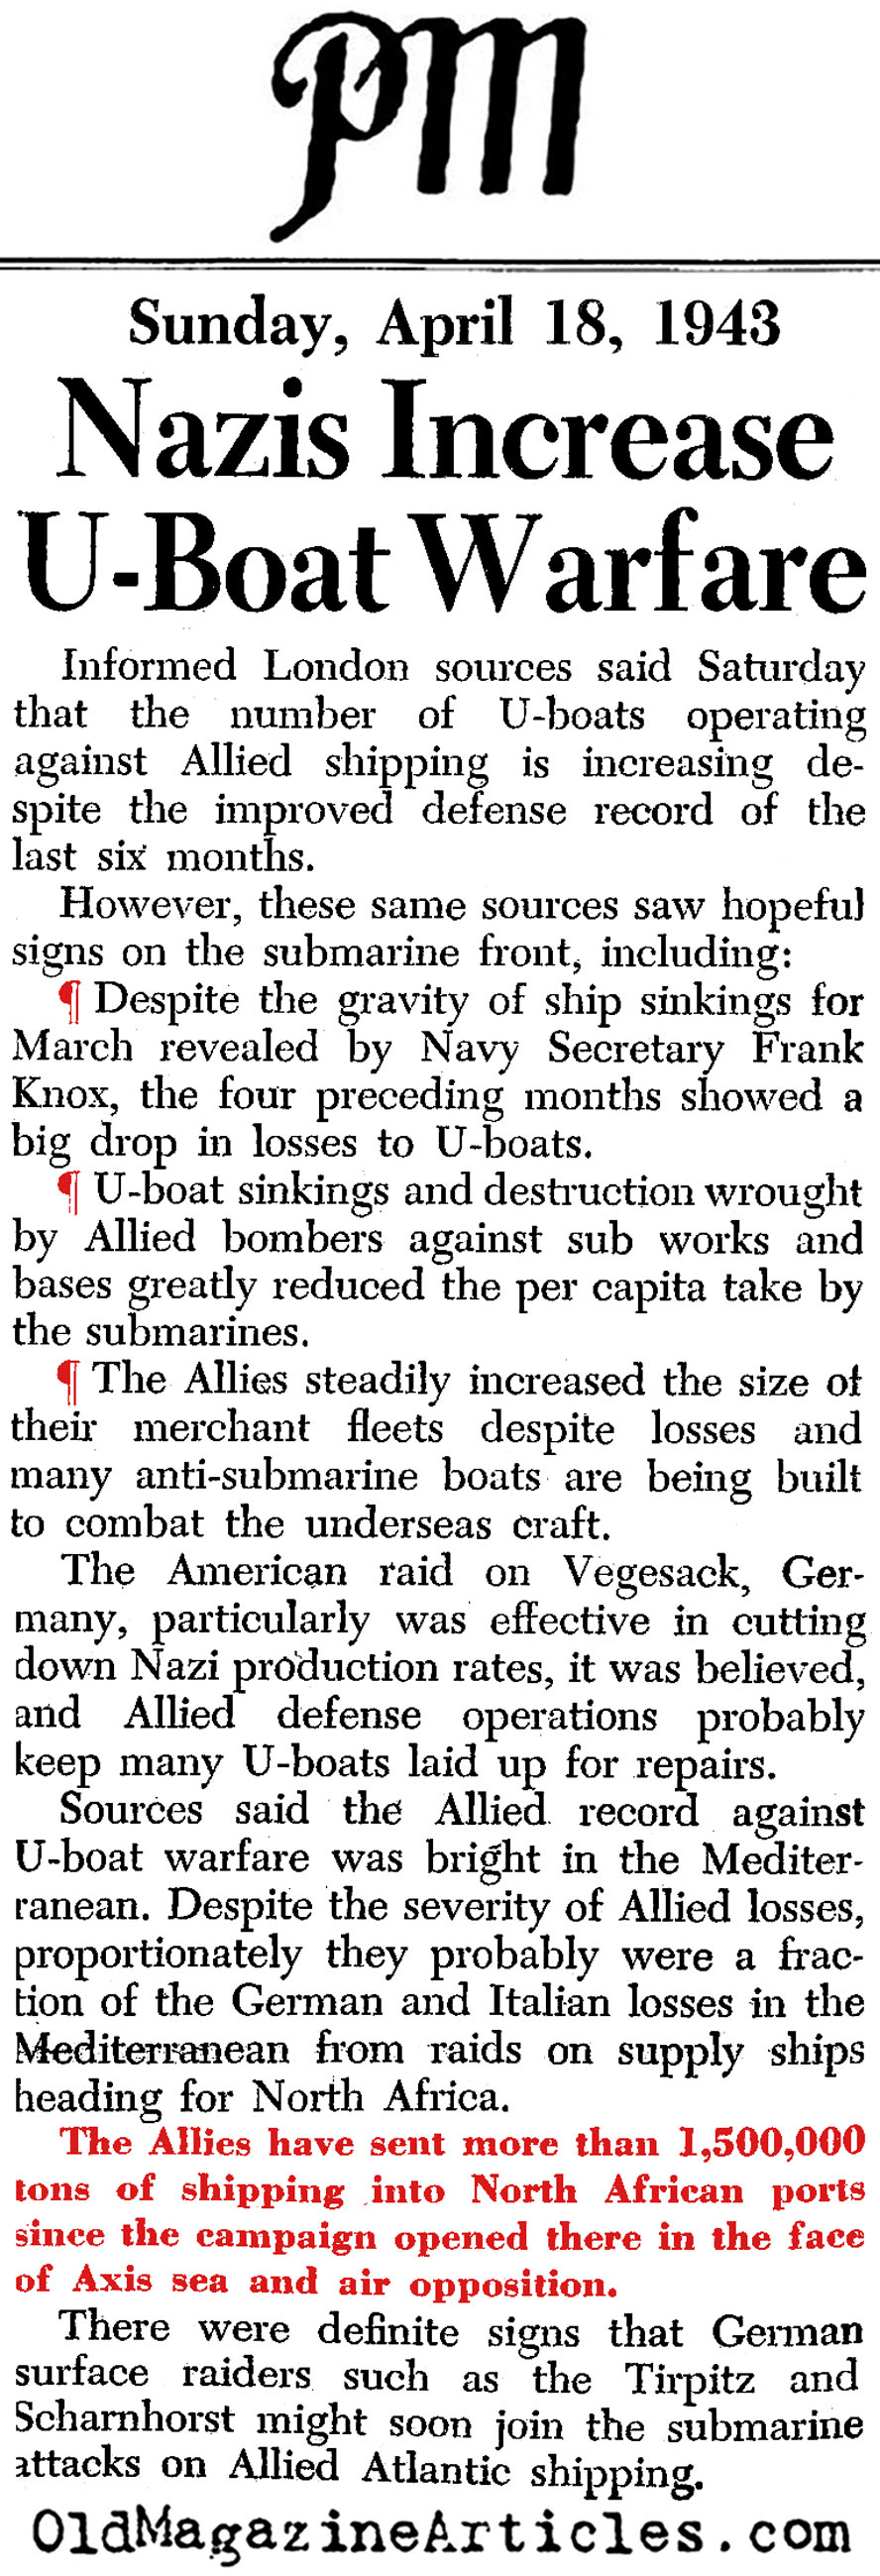 Increased U-Boat Activity (PM Tabloid, 1943)